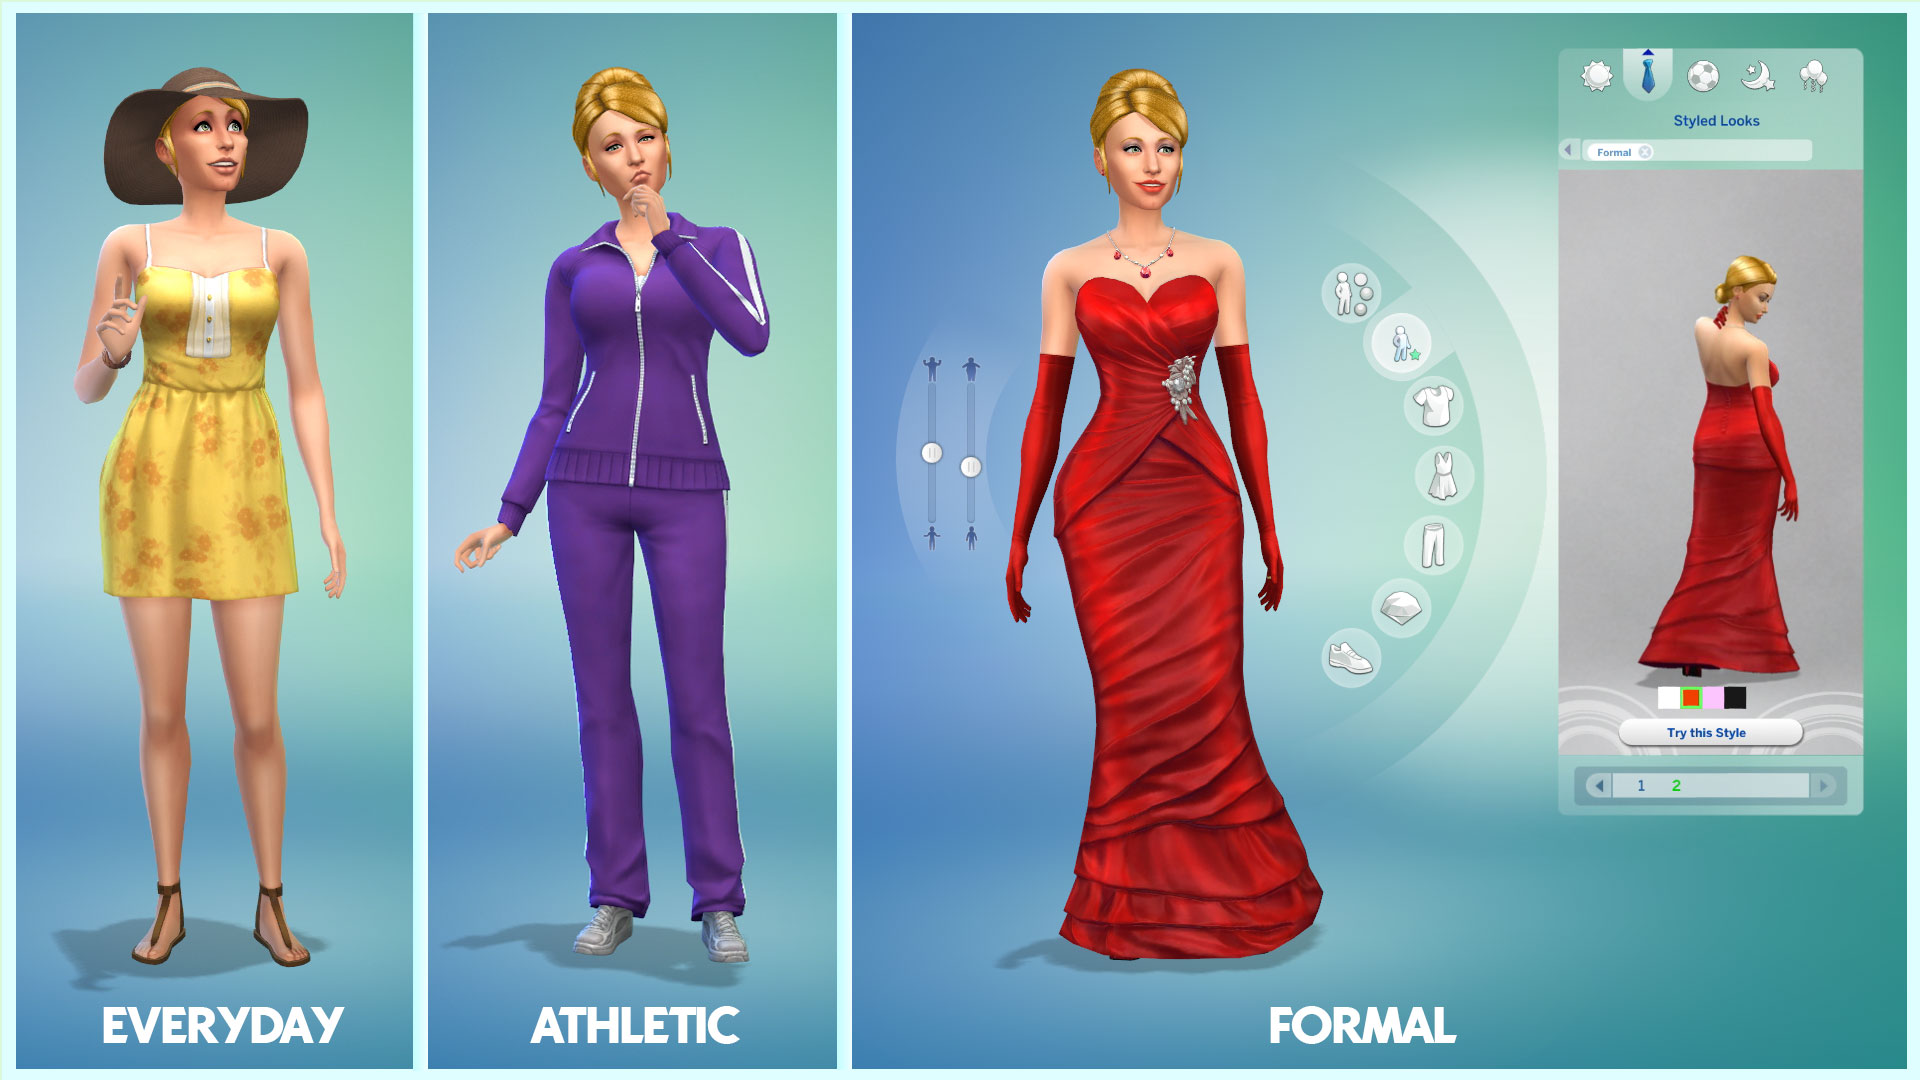 Sims 4 styled looks